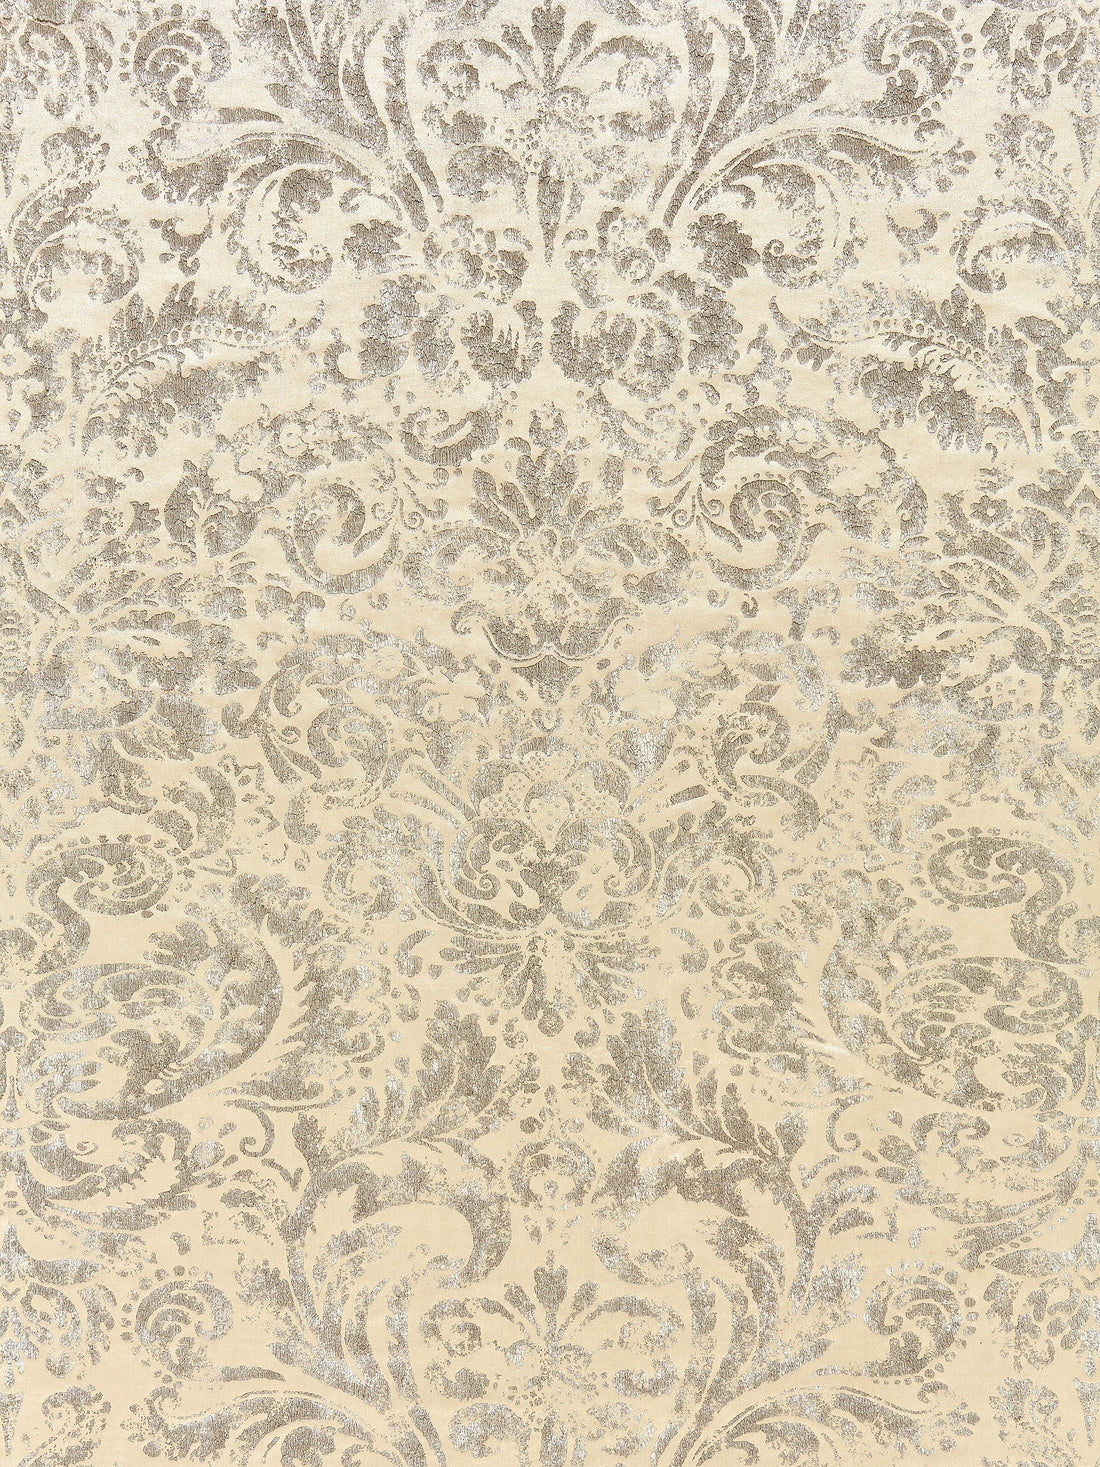 Palladio Velvet Damask fabric in antique silver color - pattern number SC 000116592 - by Scalamandre in the Scalamandre Fabrics Book 1 collection